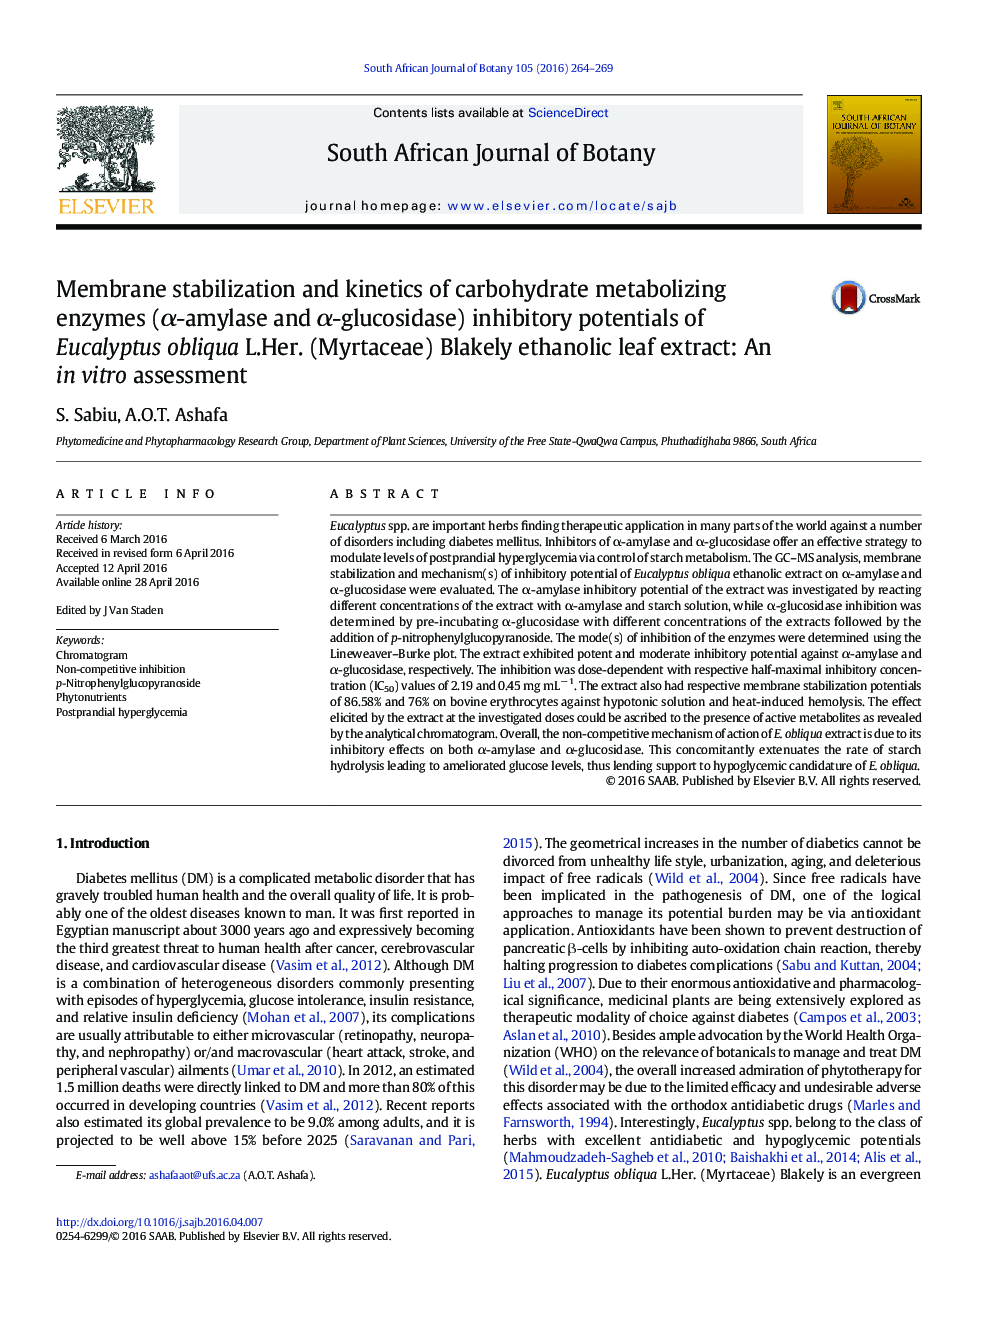 Membrane stabilization and kinetics of carbohydrate metabolizing enzymes (α-amylase and α-glucosidase) inhibitory potentials of Eucalyptus obliqua L.Her. (Myrtaceae) Blakely ethanolic leaf extract: An in vitro assessment